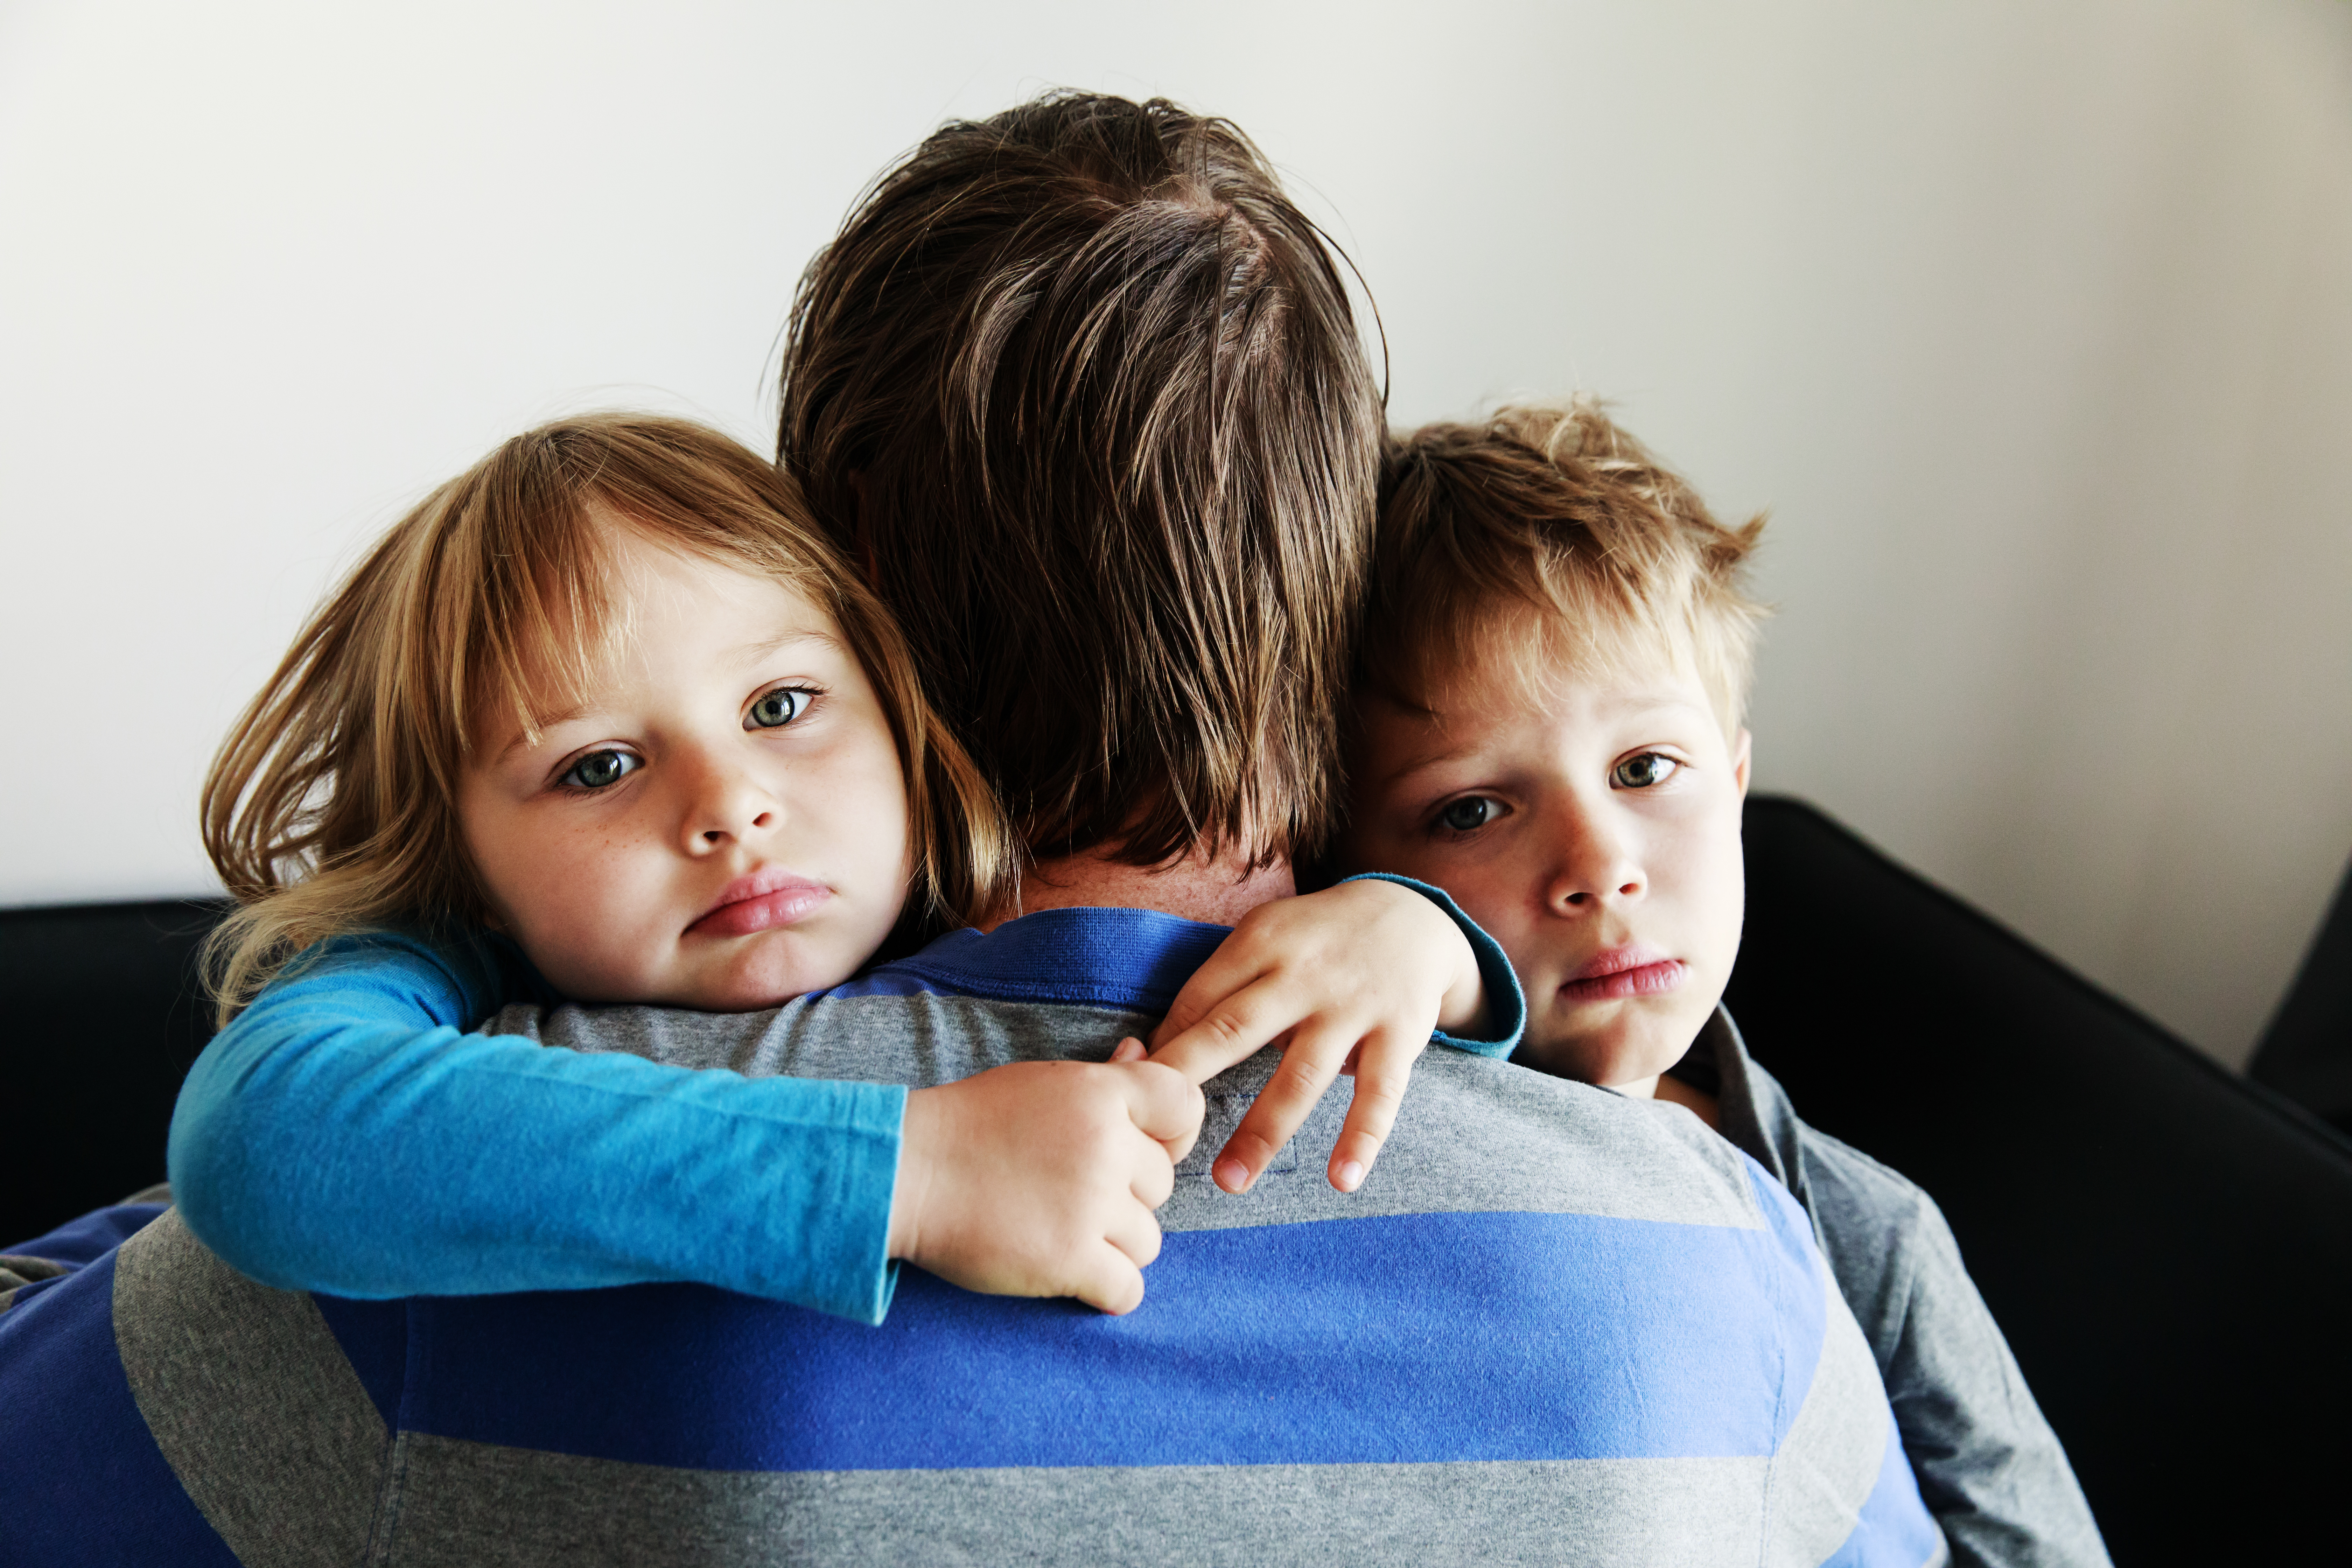 sad kids hugging father, family in sorrow, loss and pain concept